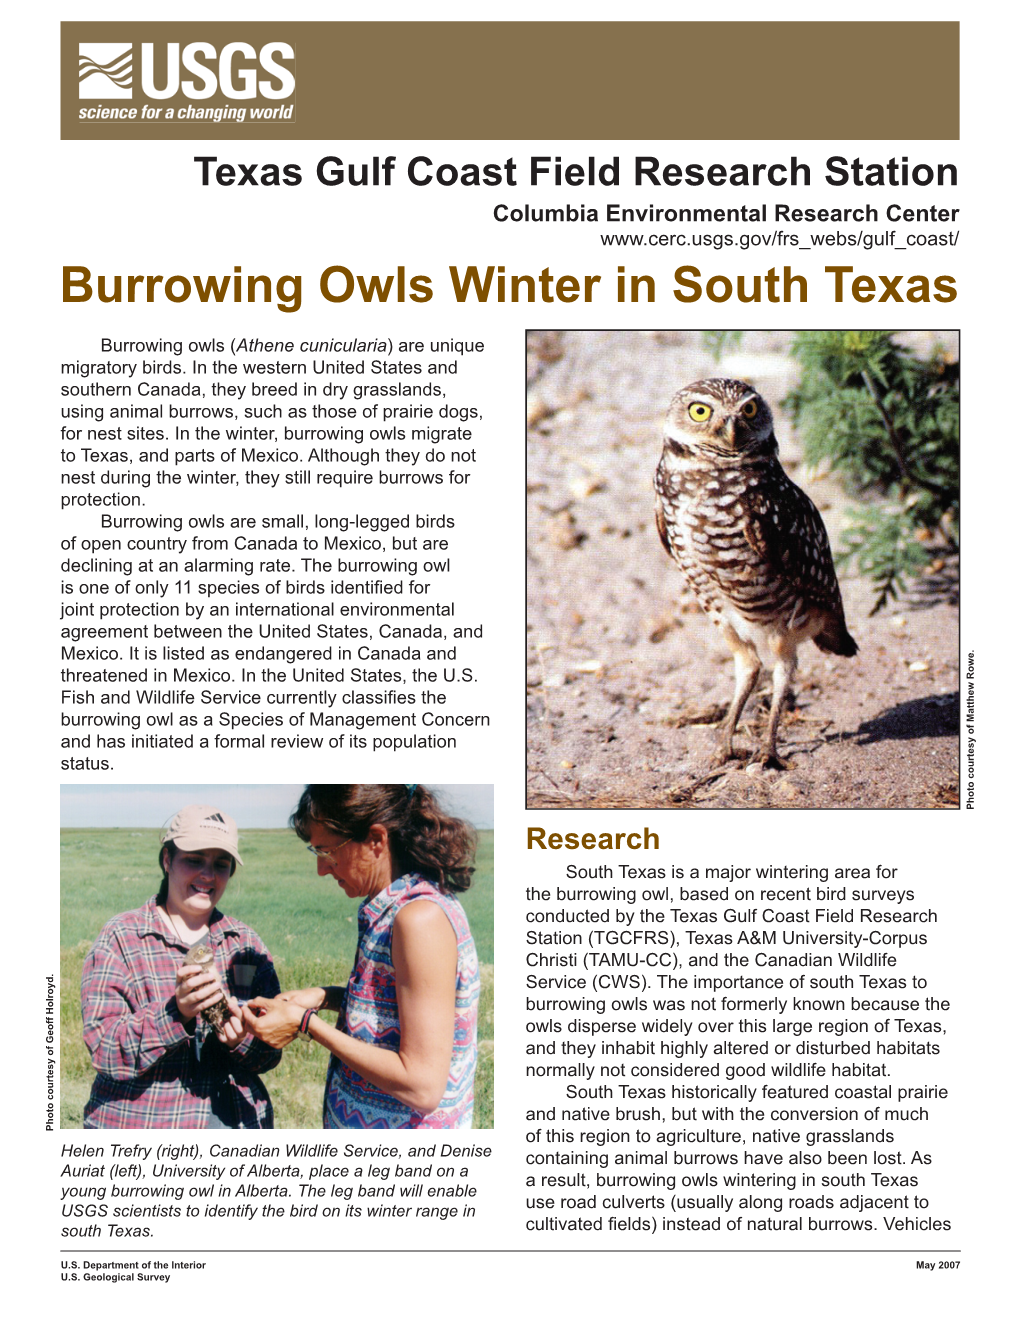 Burrowing Owls Winter in South Texas